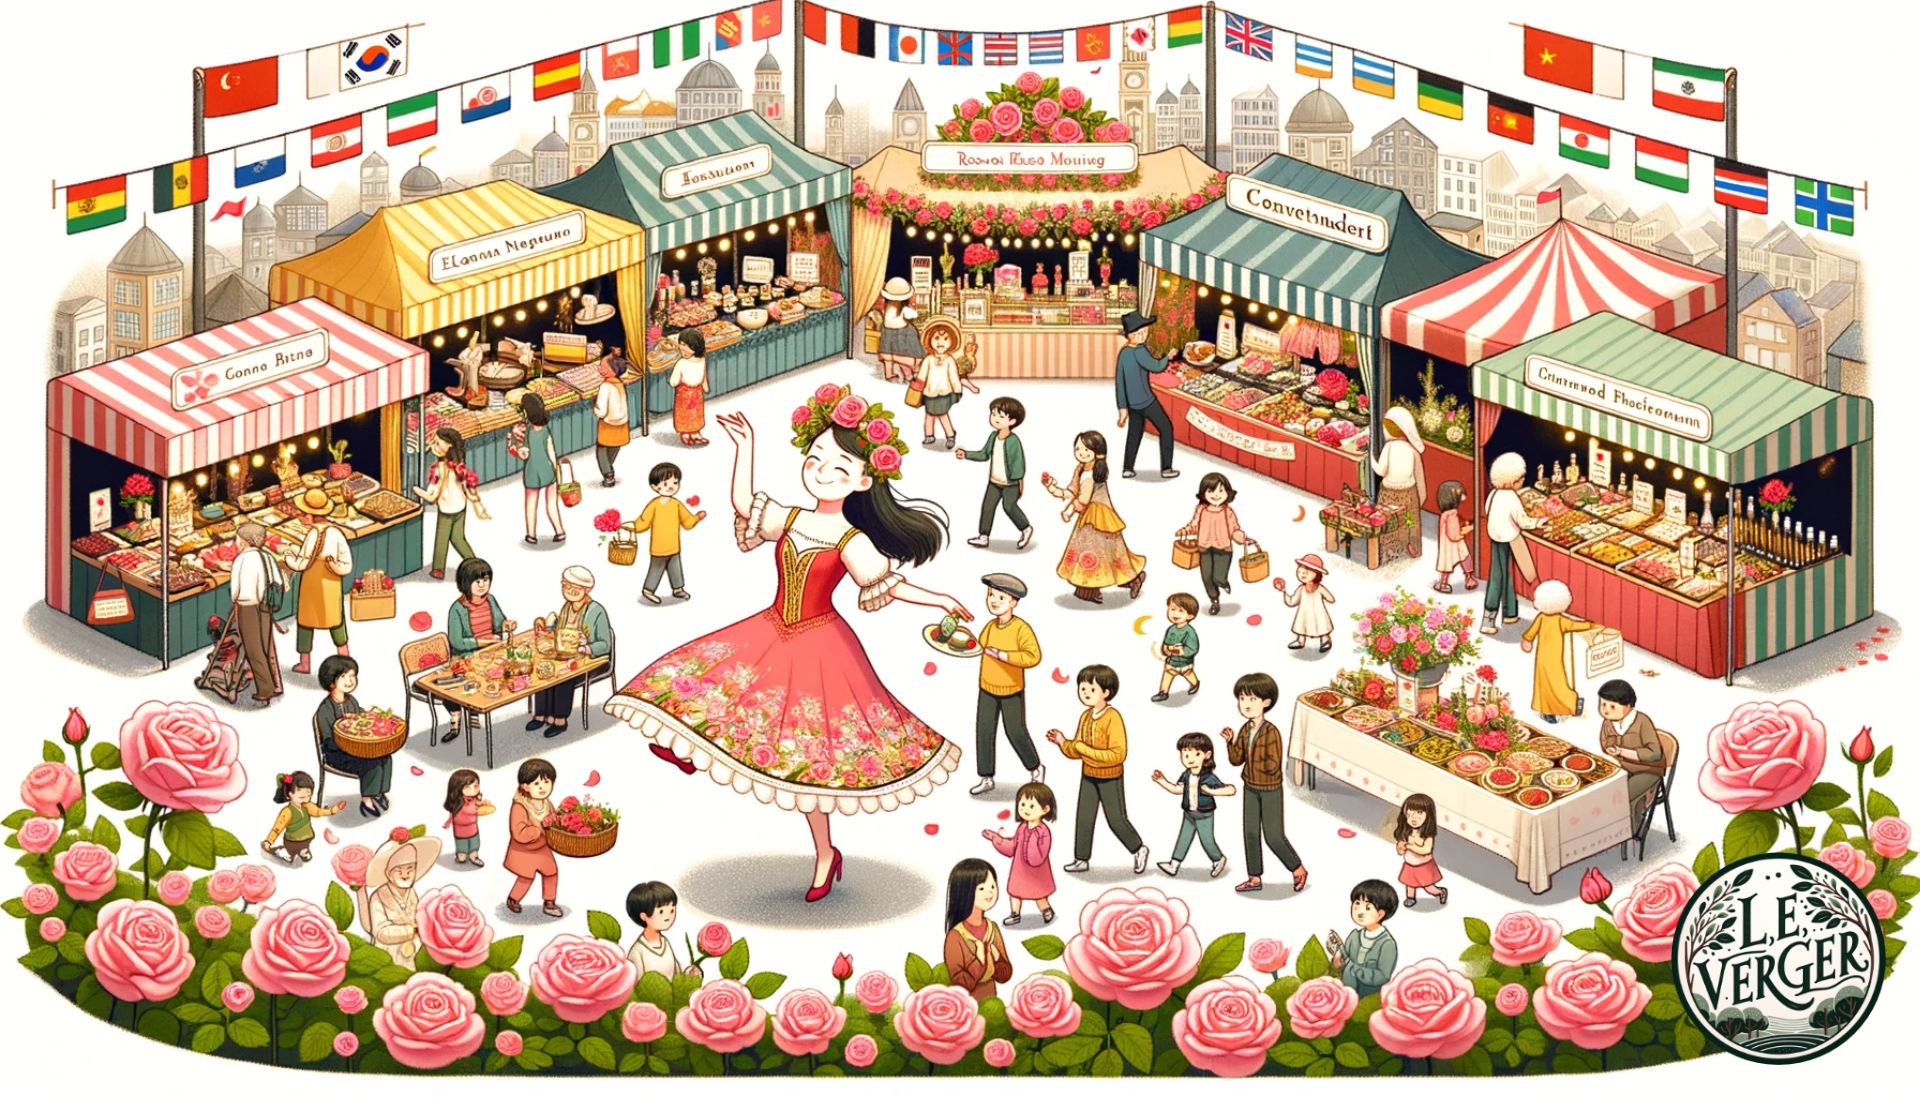 Illustration of a bustling global festival dedicated to roses. Stalls from different countries showcase their unique rose products and traditions. There's a dance performance with dancers wearing rose-themed costumes, children participating in rose crafting, and visitors enjoying rose-flavoured delicacies.